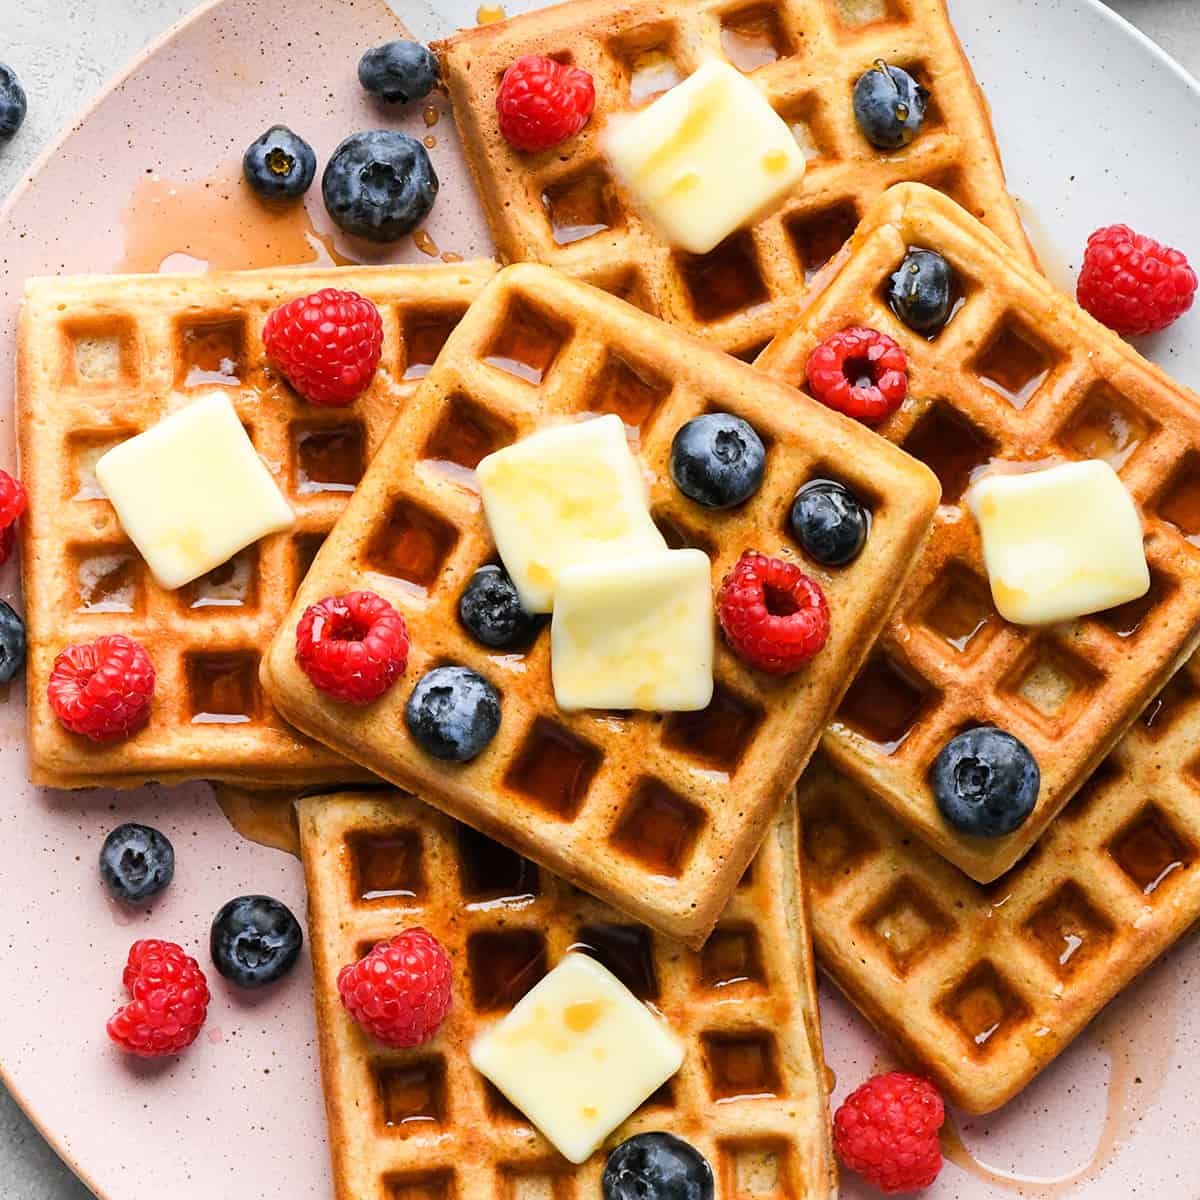 6 waffles on a plate with syrup, butter and berries